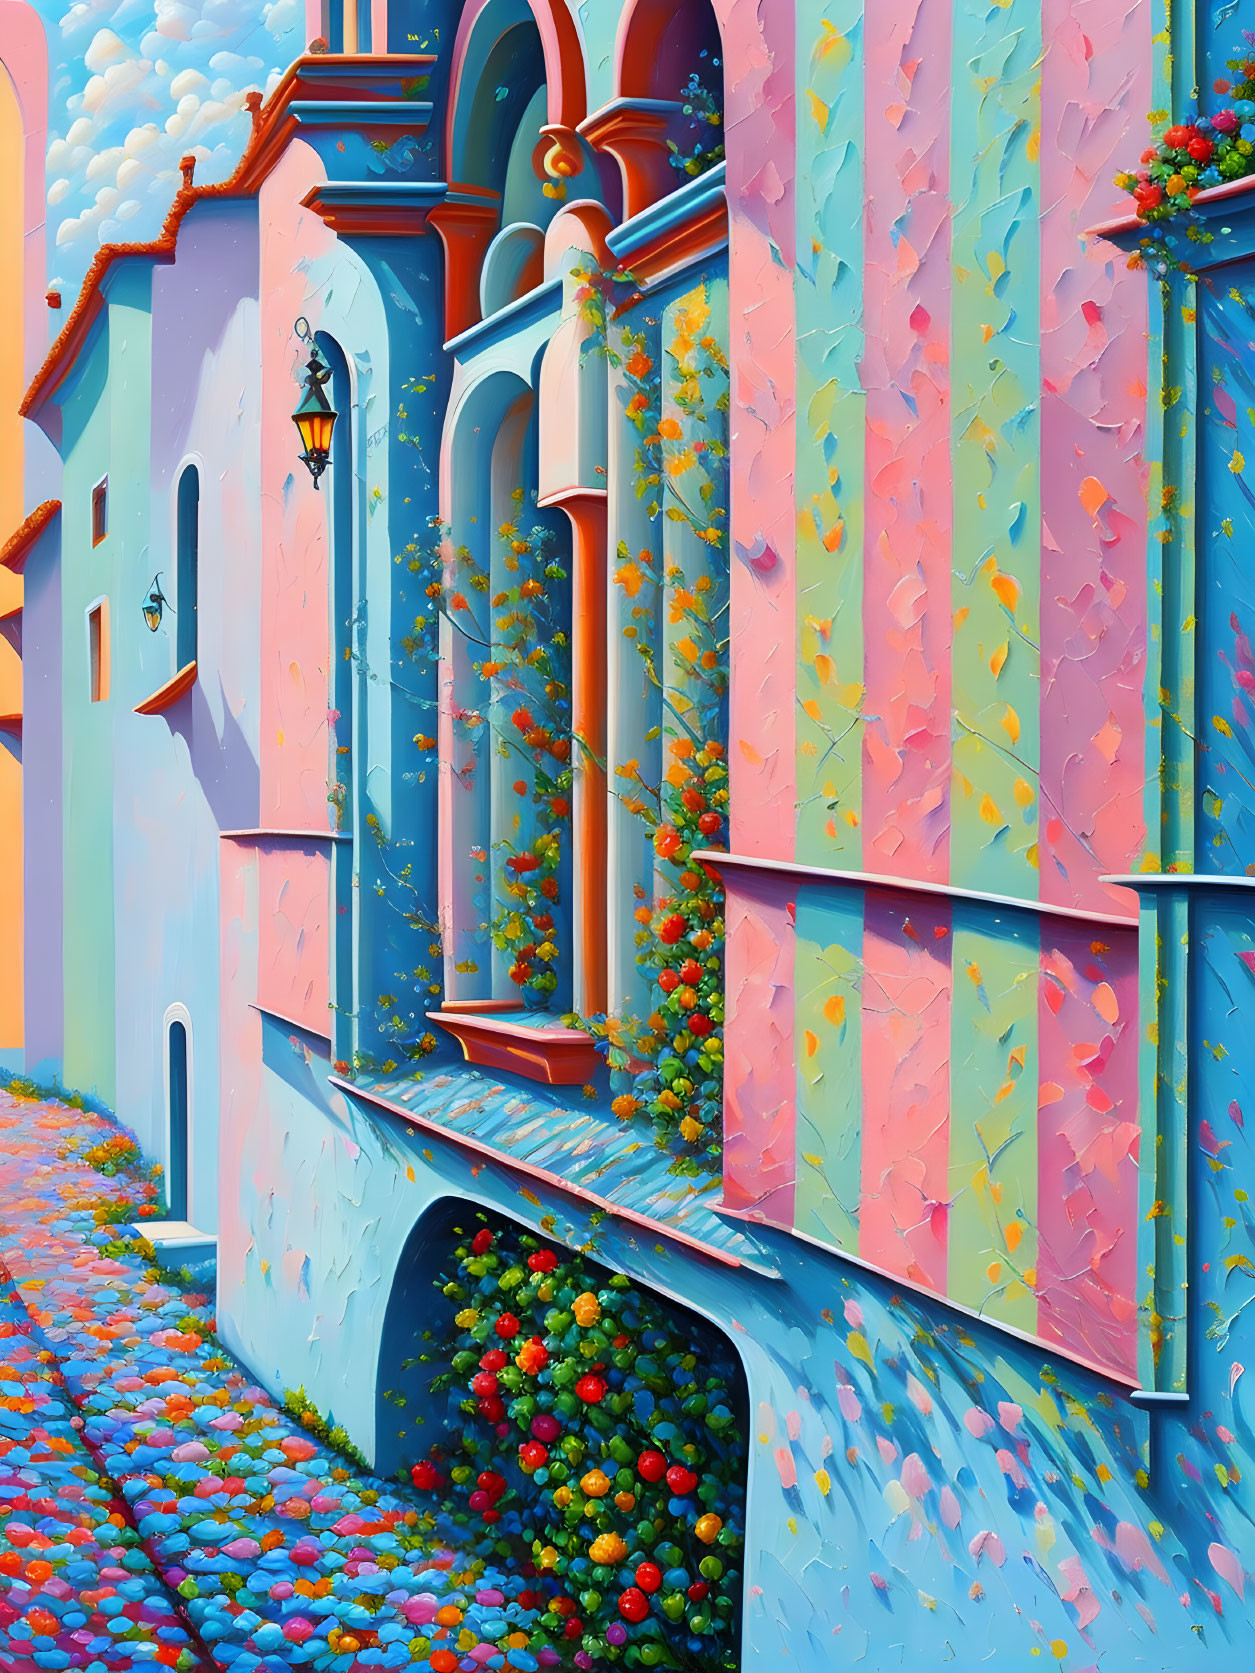 Colorful street scene with flower mosaic, pastel buildings, arched doorway, lantern, and blo